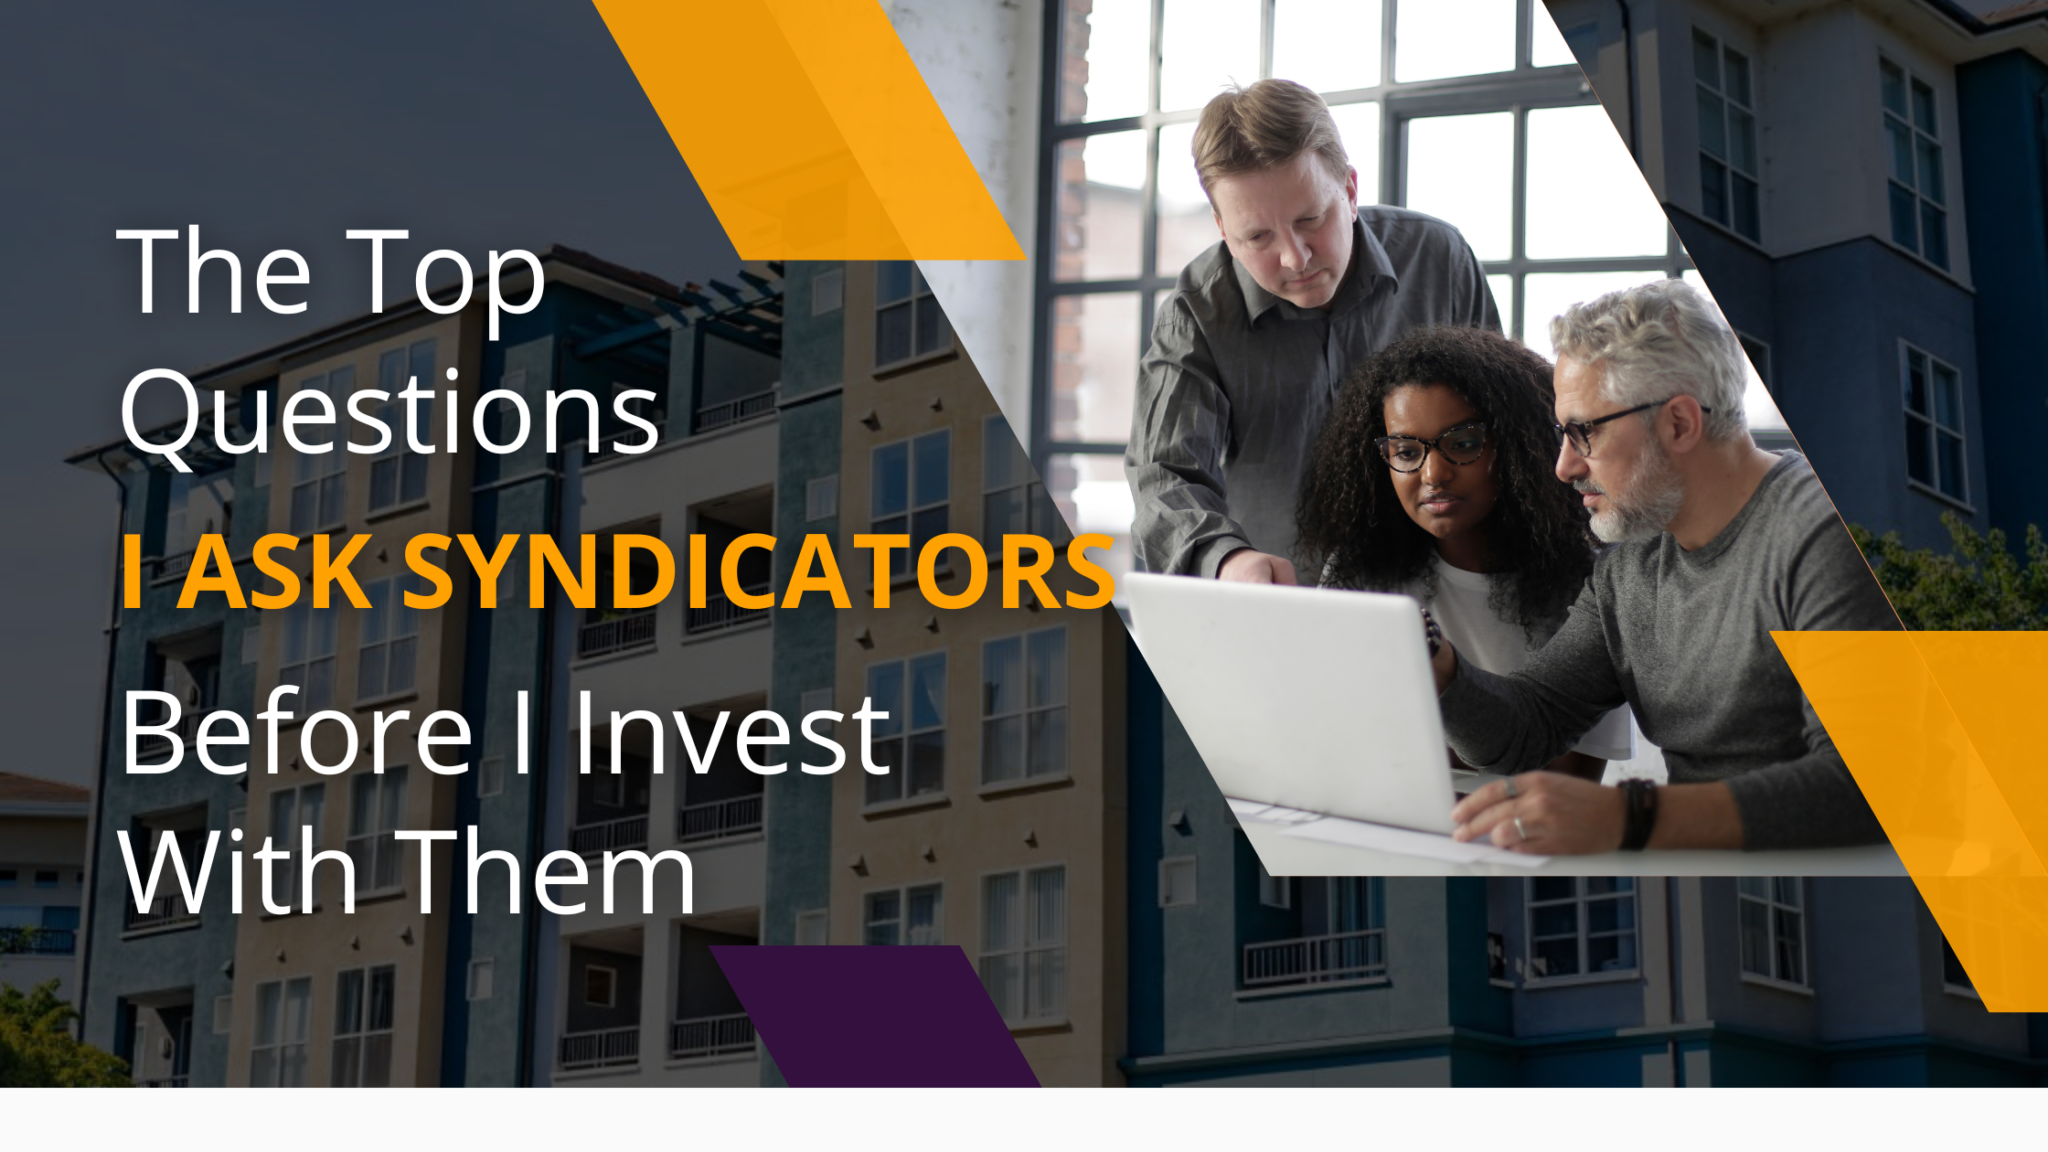 The top questions I ask syndicators before I invest with them